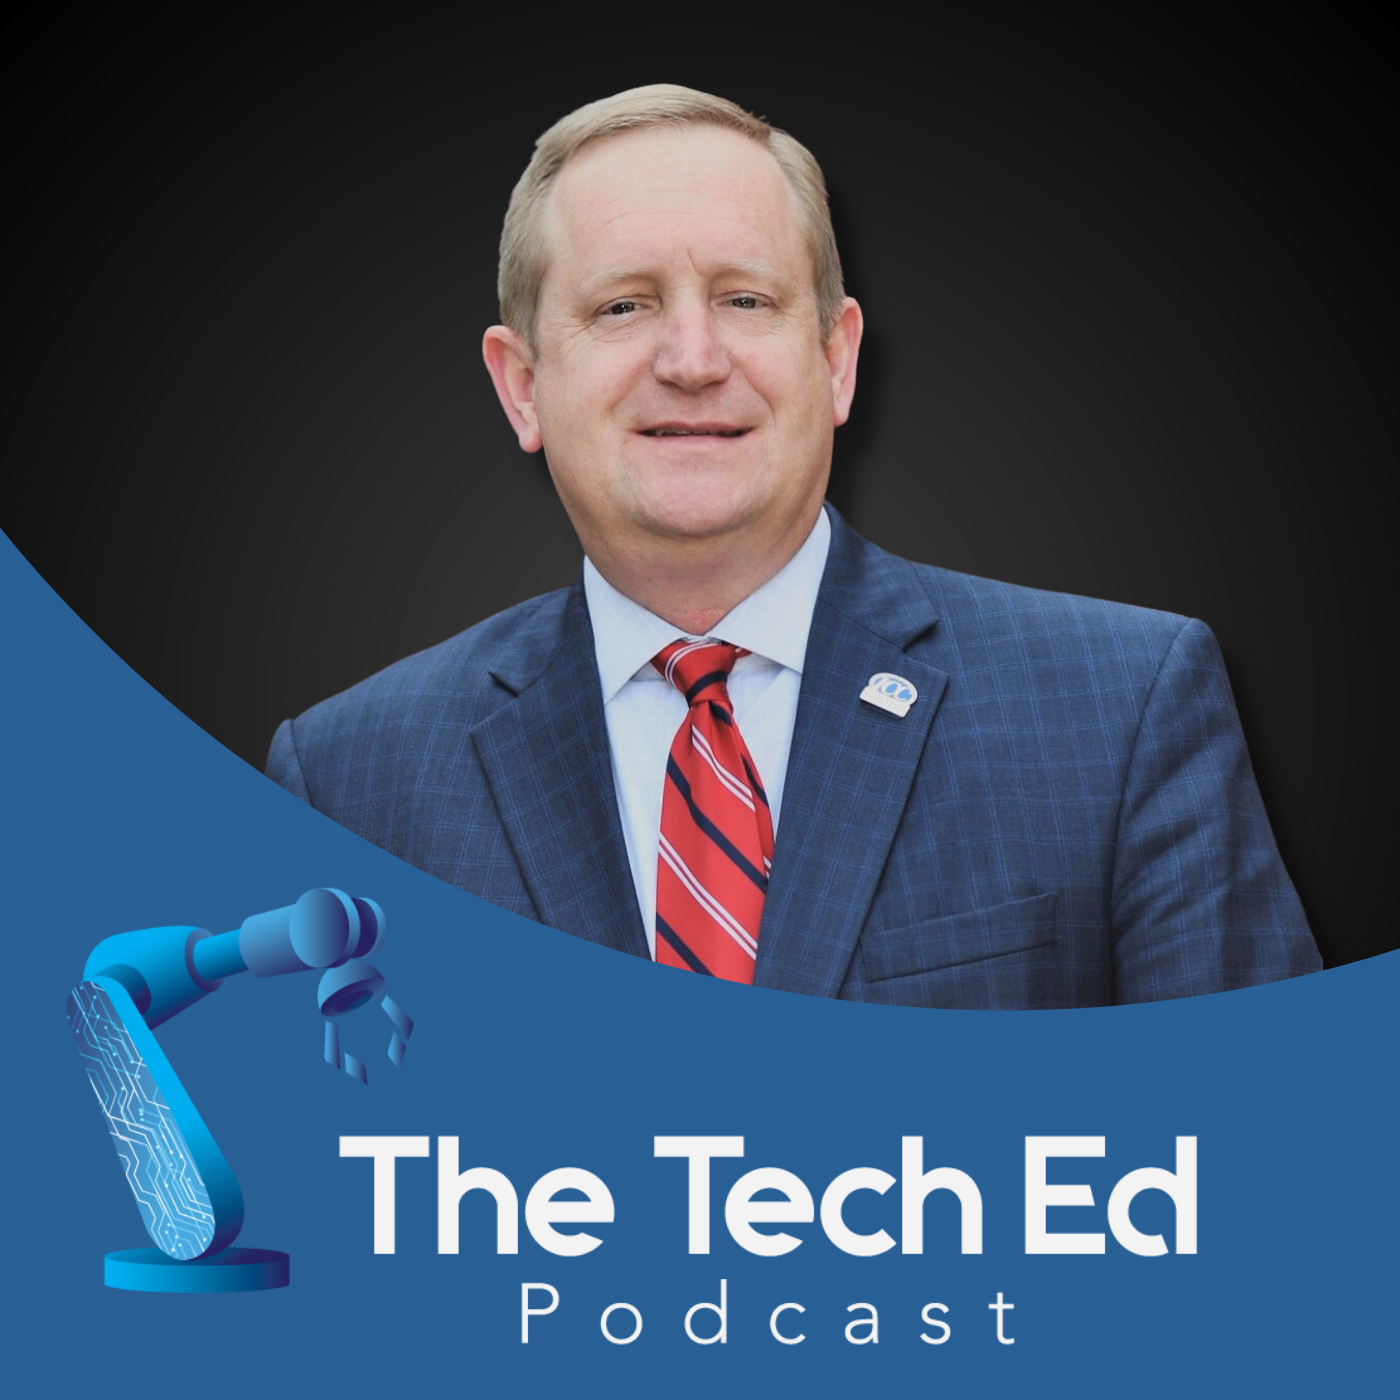 Dr. Jay Allen on The TechEd Podcast